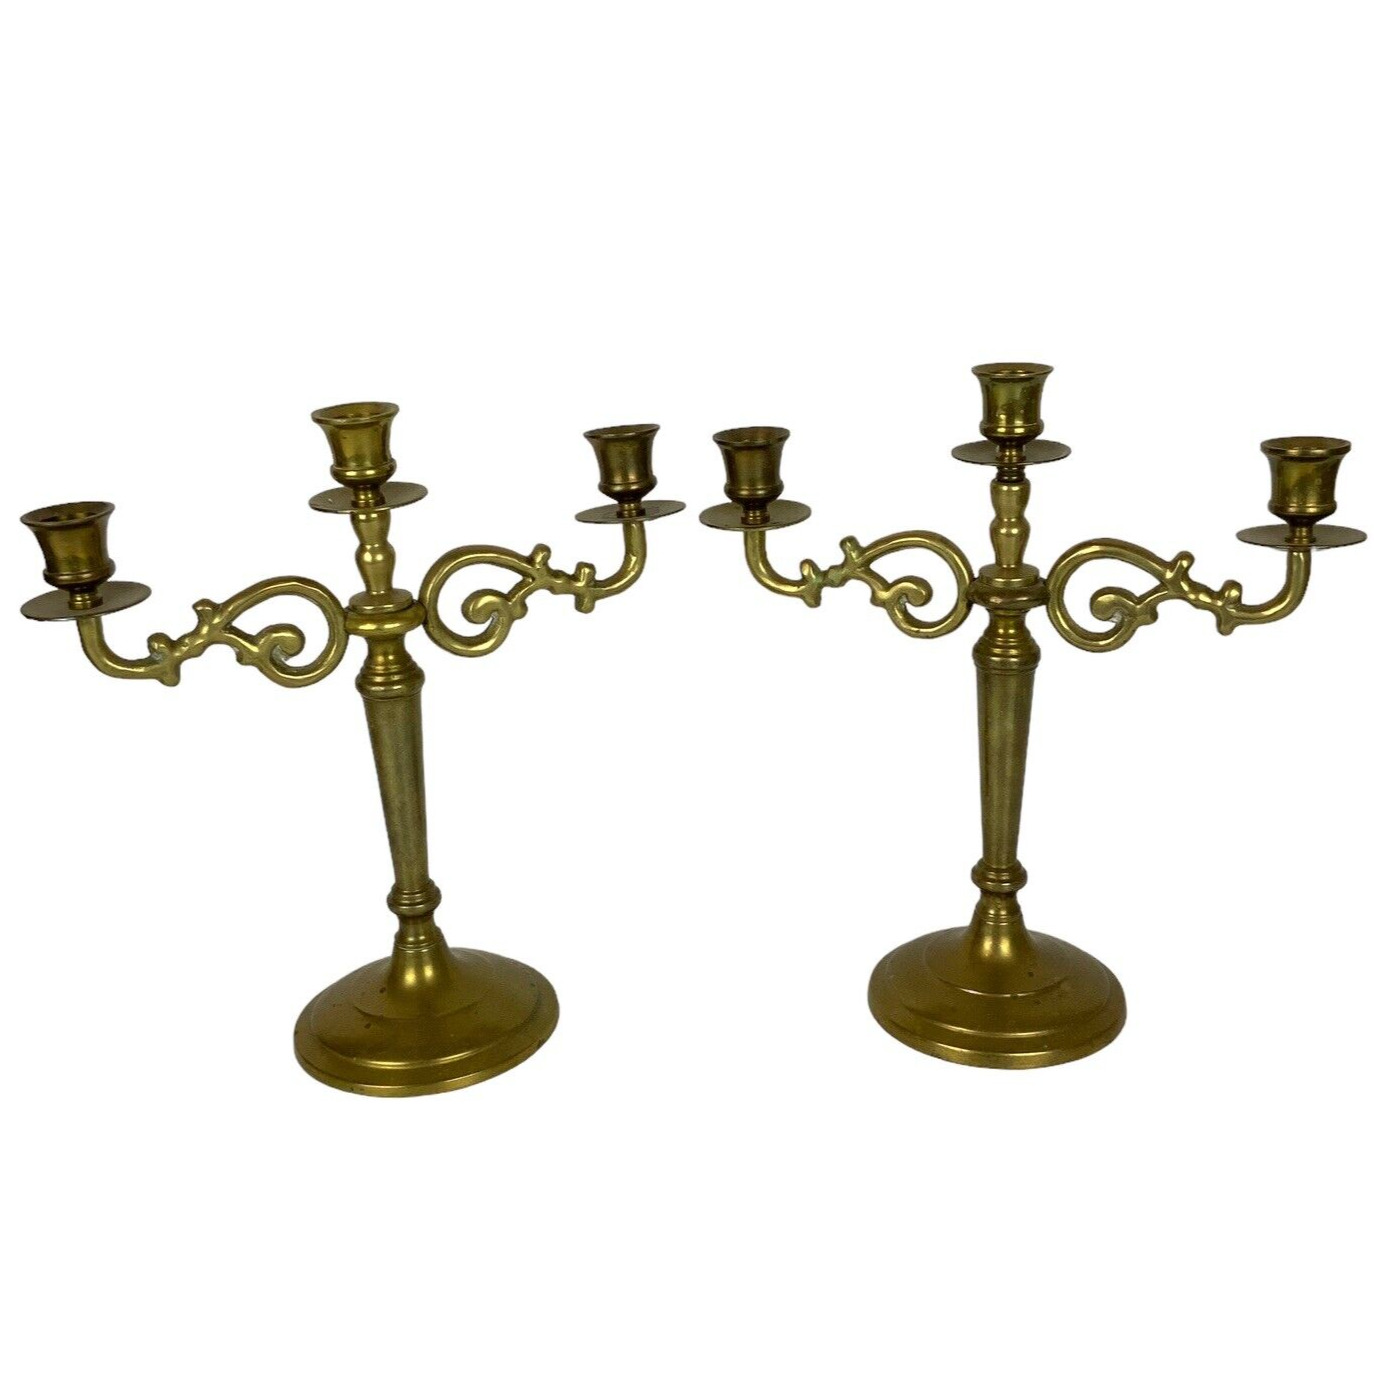 Vintage Gatco Solid Brass Candelabra Pair 3 Arm Candlestick Holders 1980s